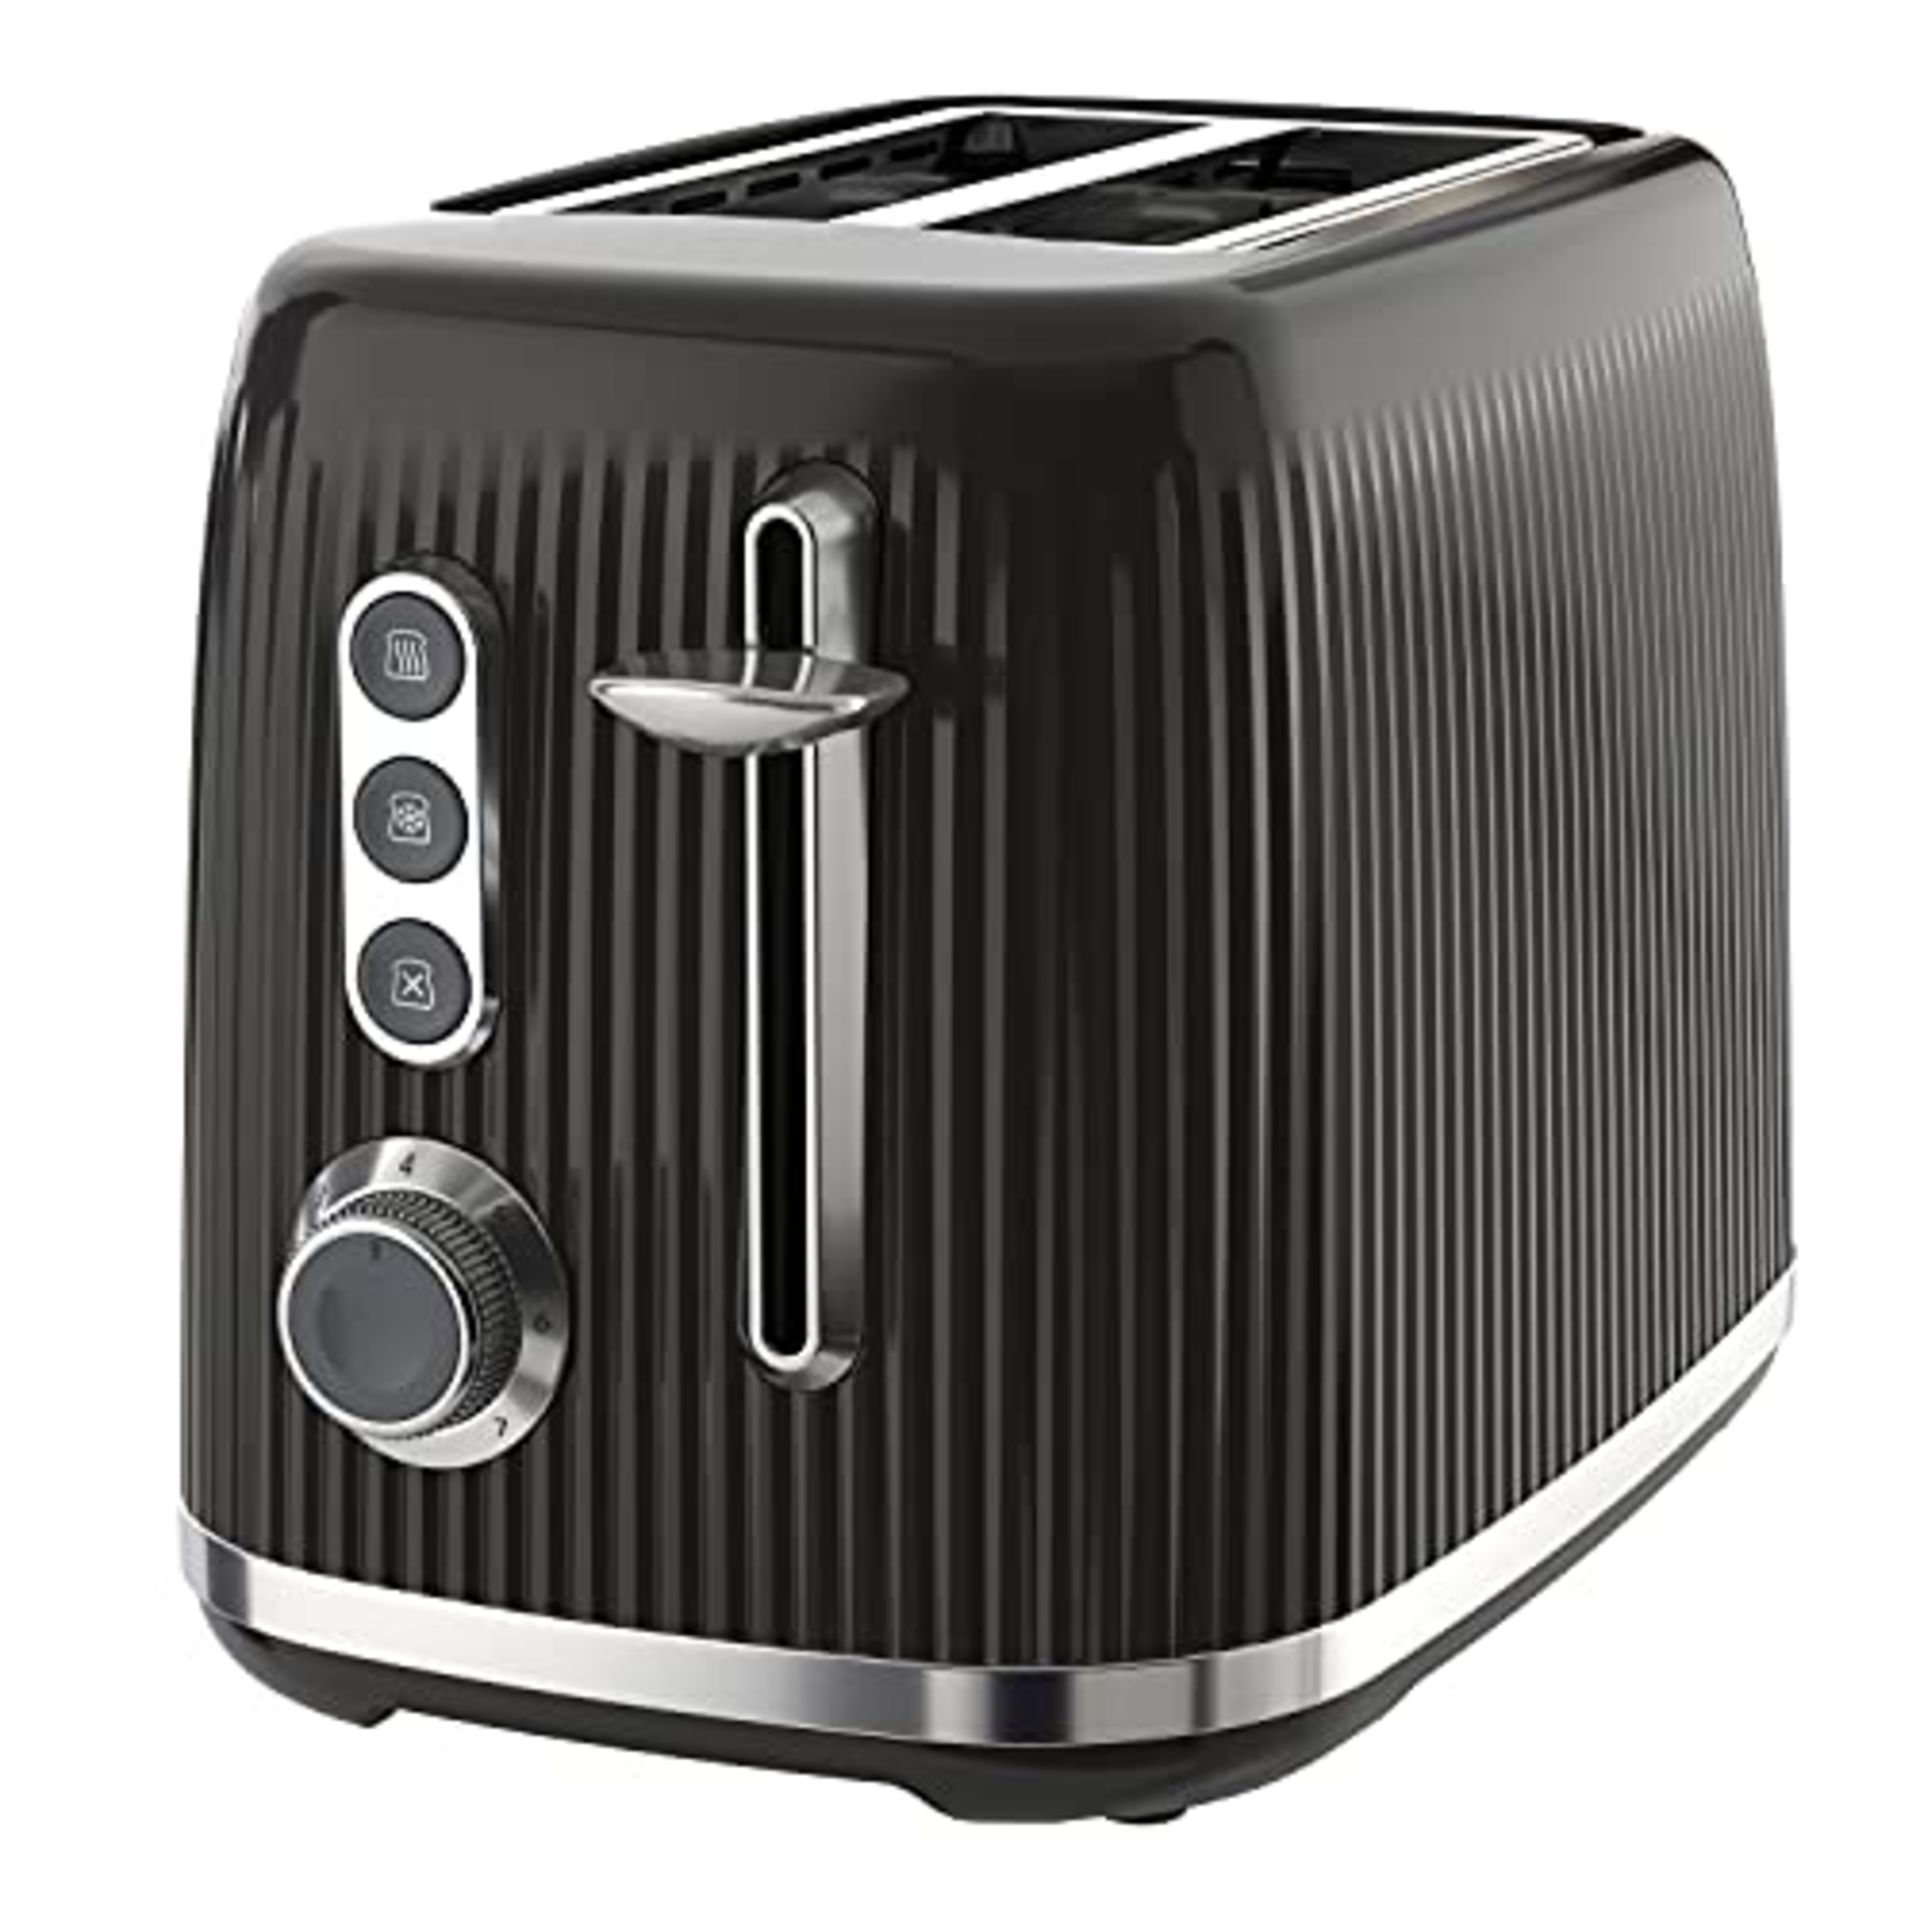 Breville Bold Black 2-Slice Toaster with High-Lift and Wide Slots | Black and Silver C